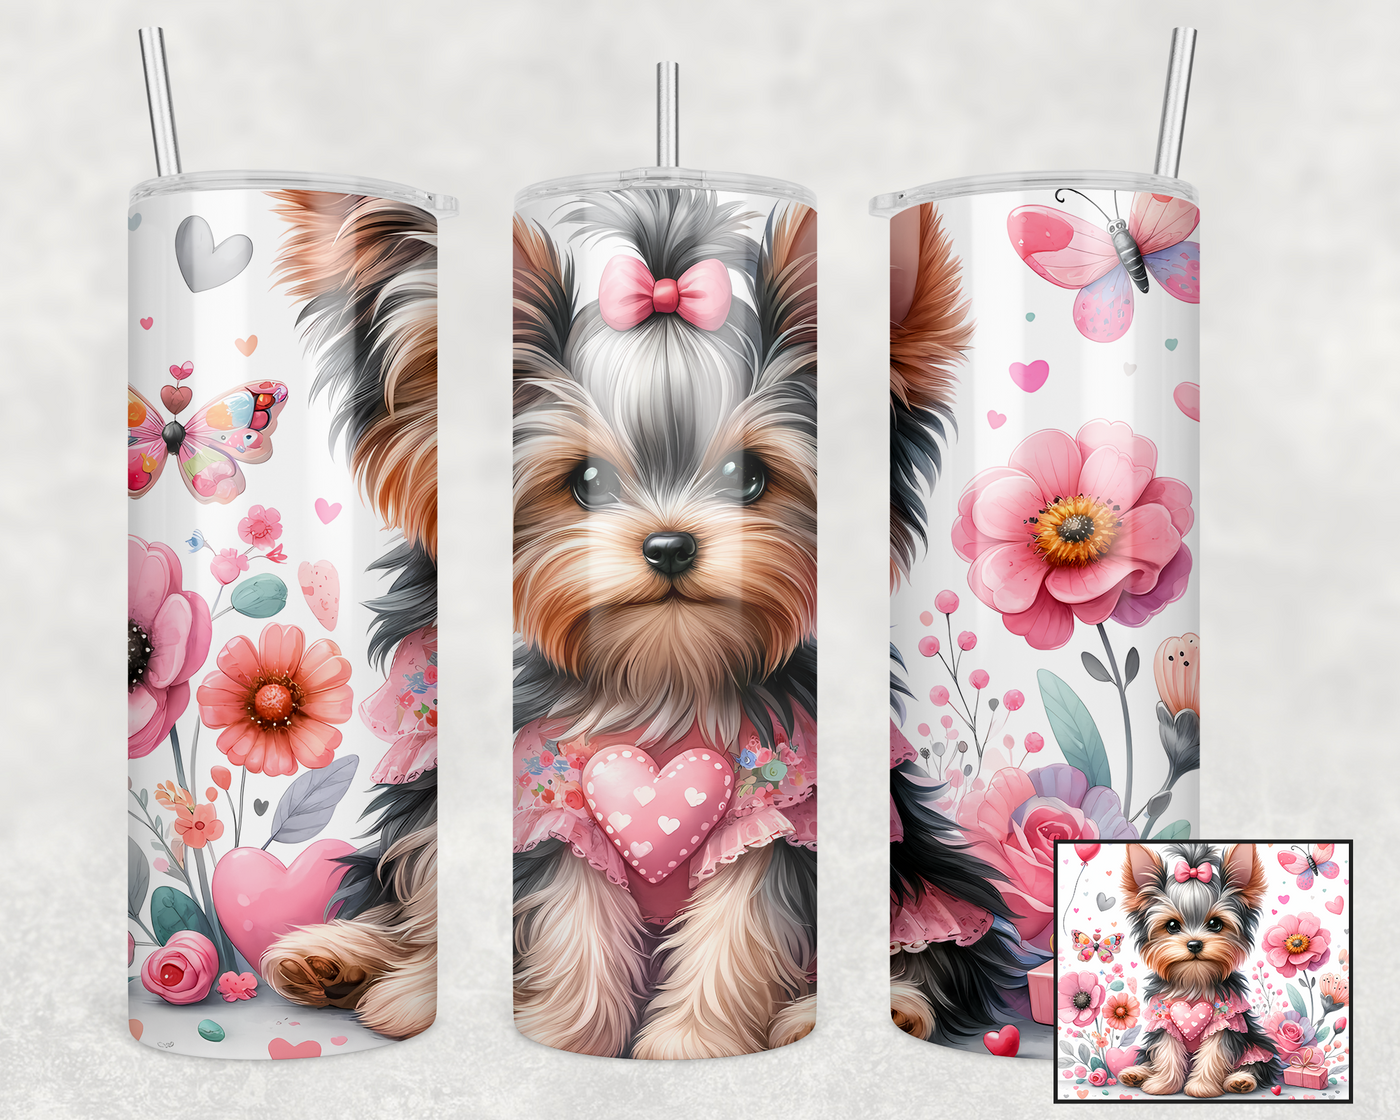 Blooming Yorkie Beauty 20oz Tumbler - Delicate Florals & Puppy Love Insulated Drinkware 🌺🐶